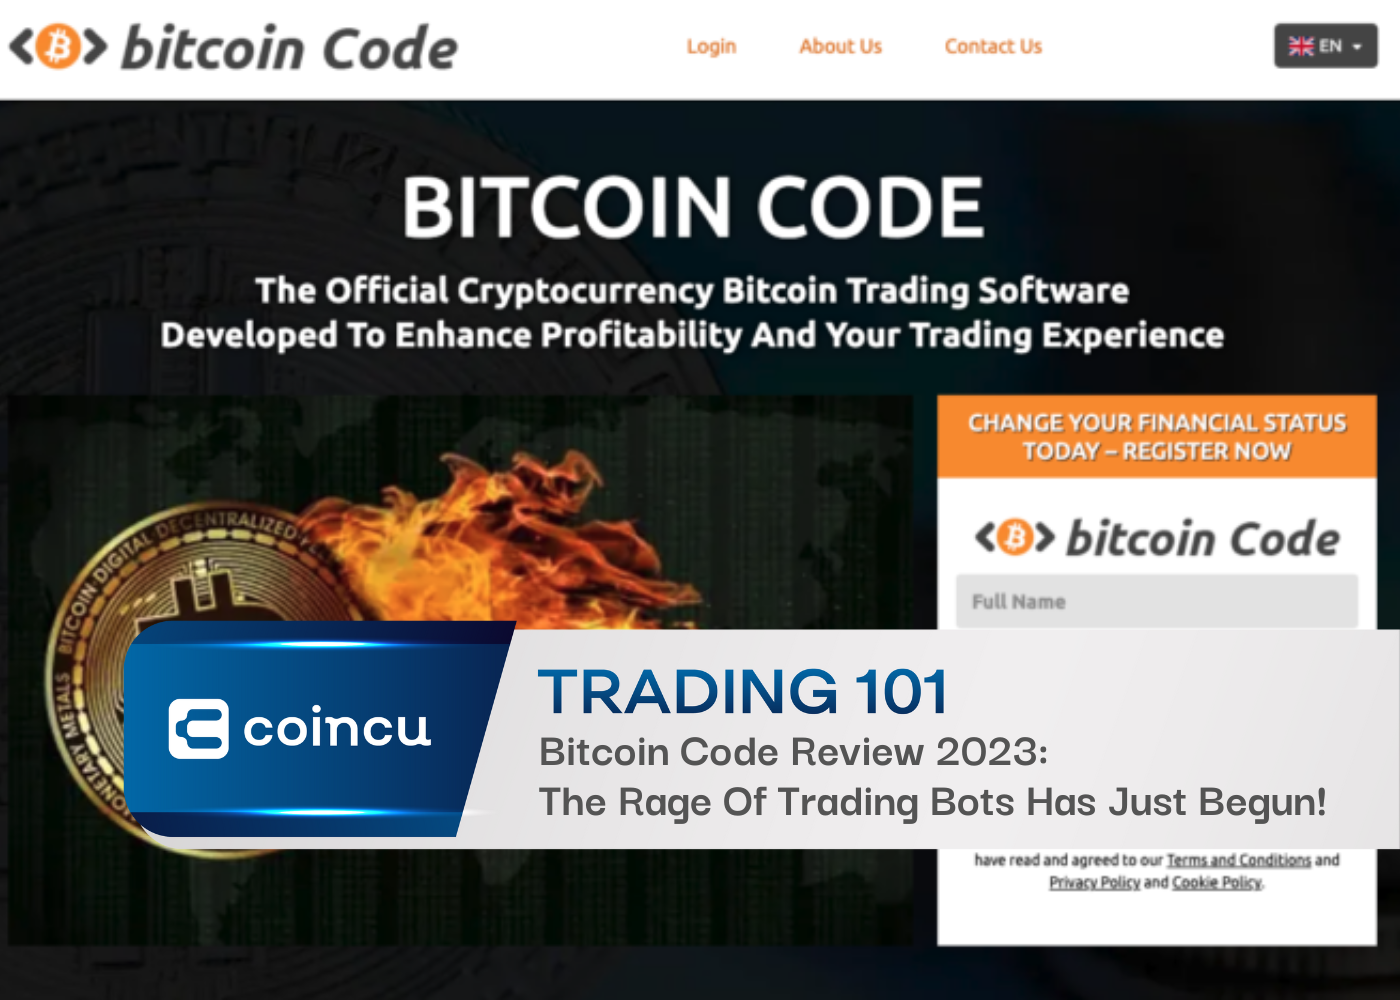 Bitcoin Code Review 2023